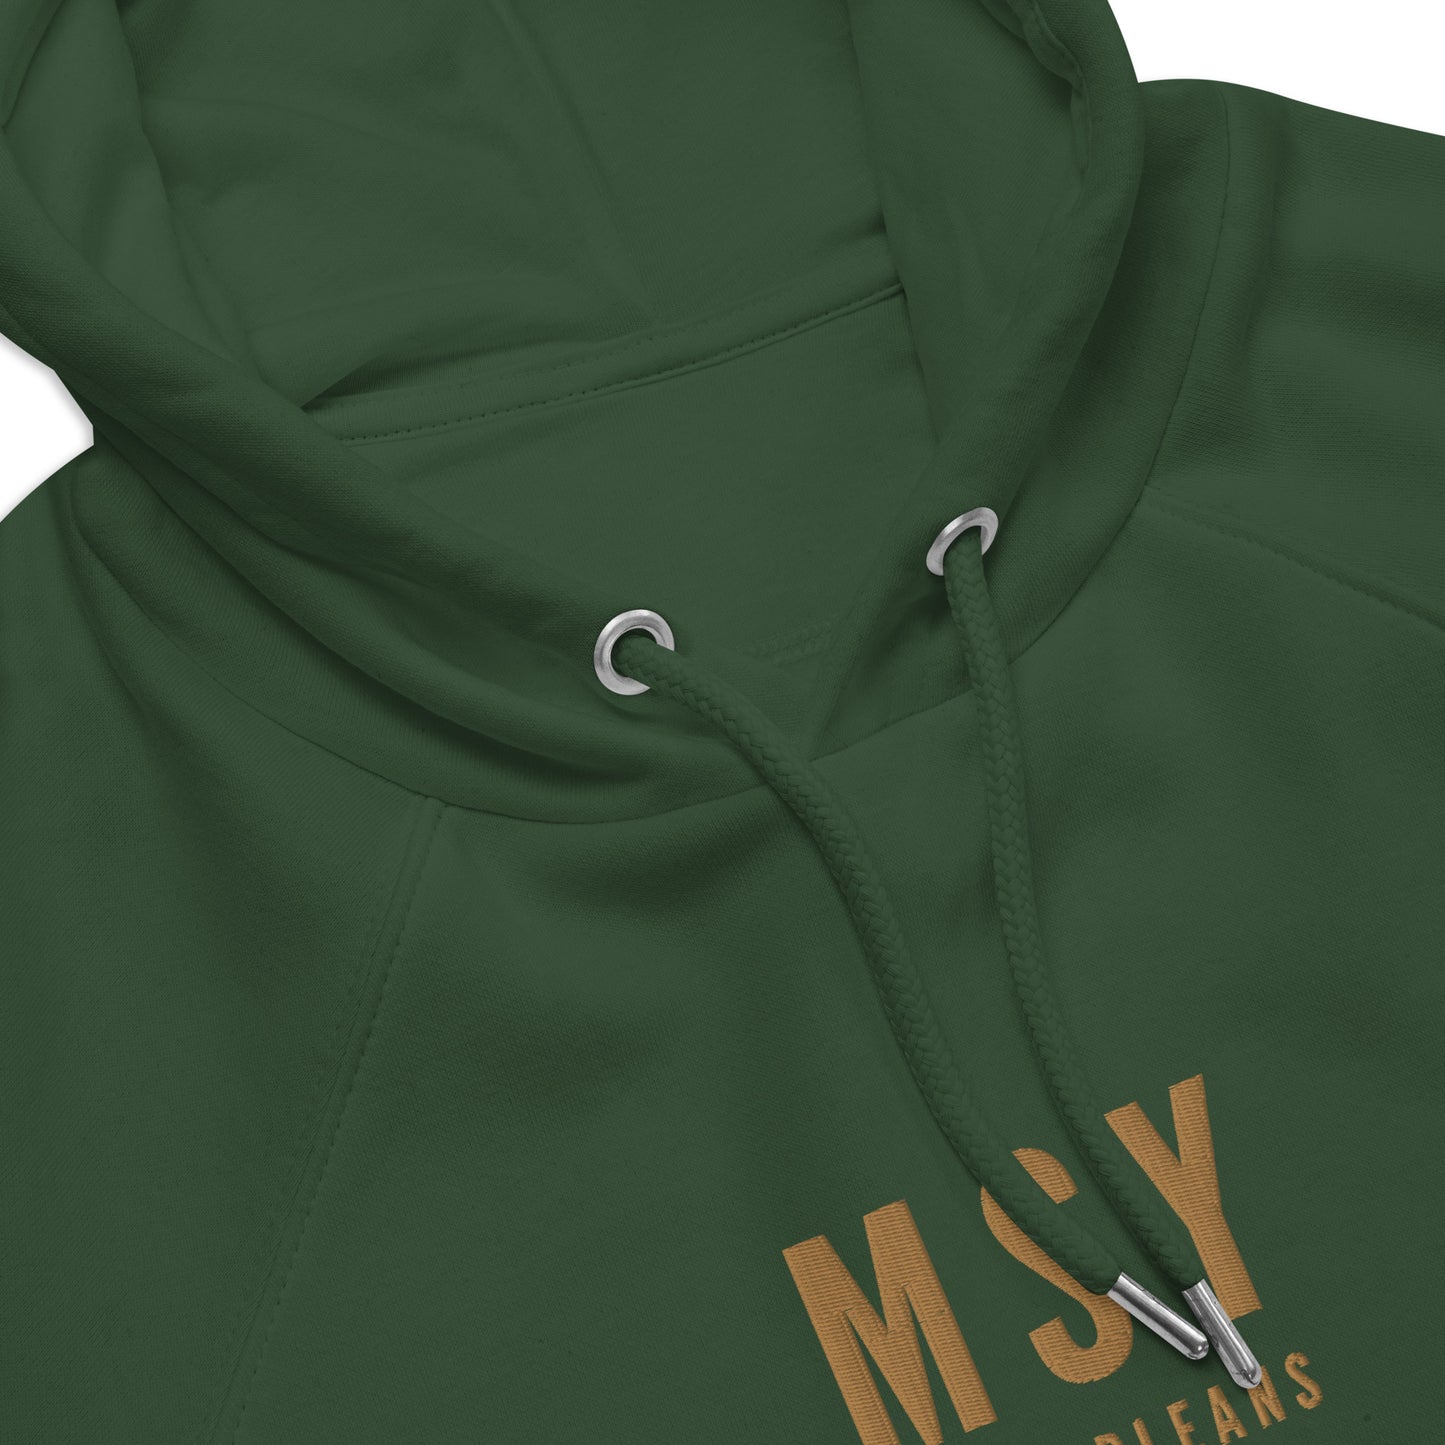 City Organic Hoodie - Old Gold • MSY New Orleans • YHM Designs - Image 07